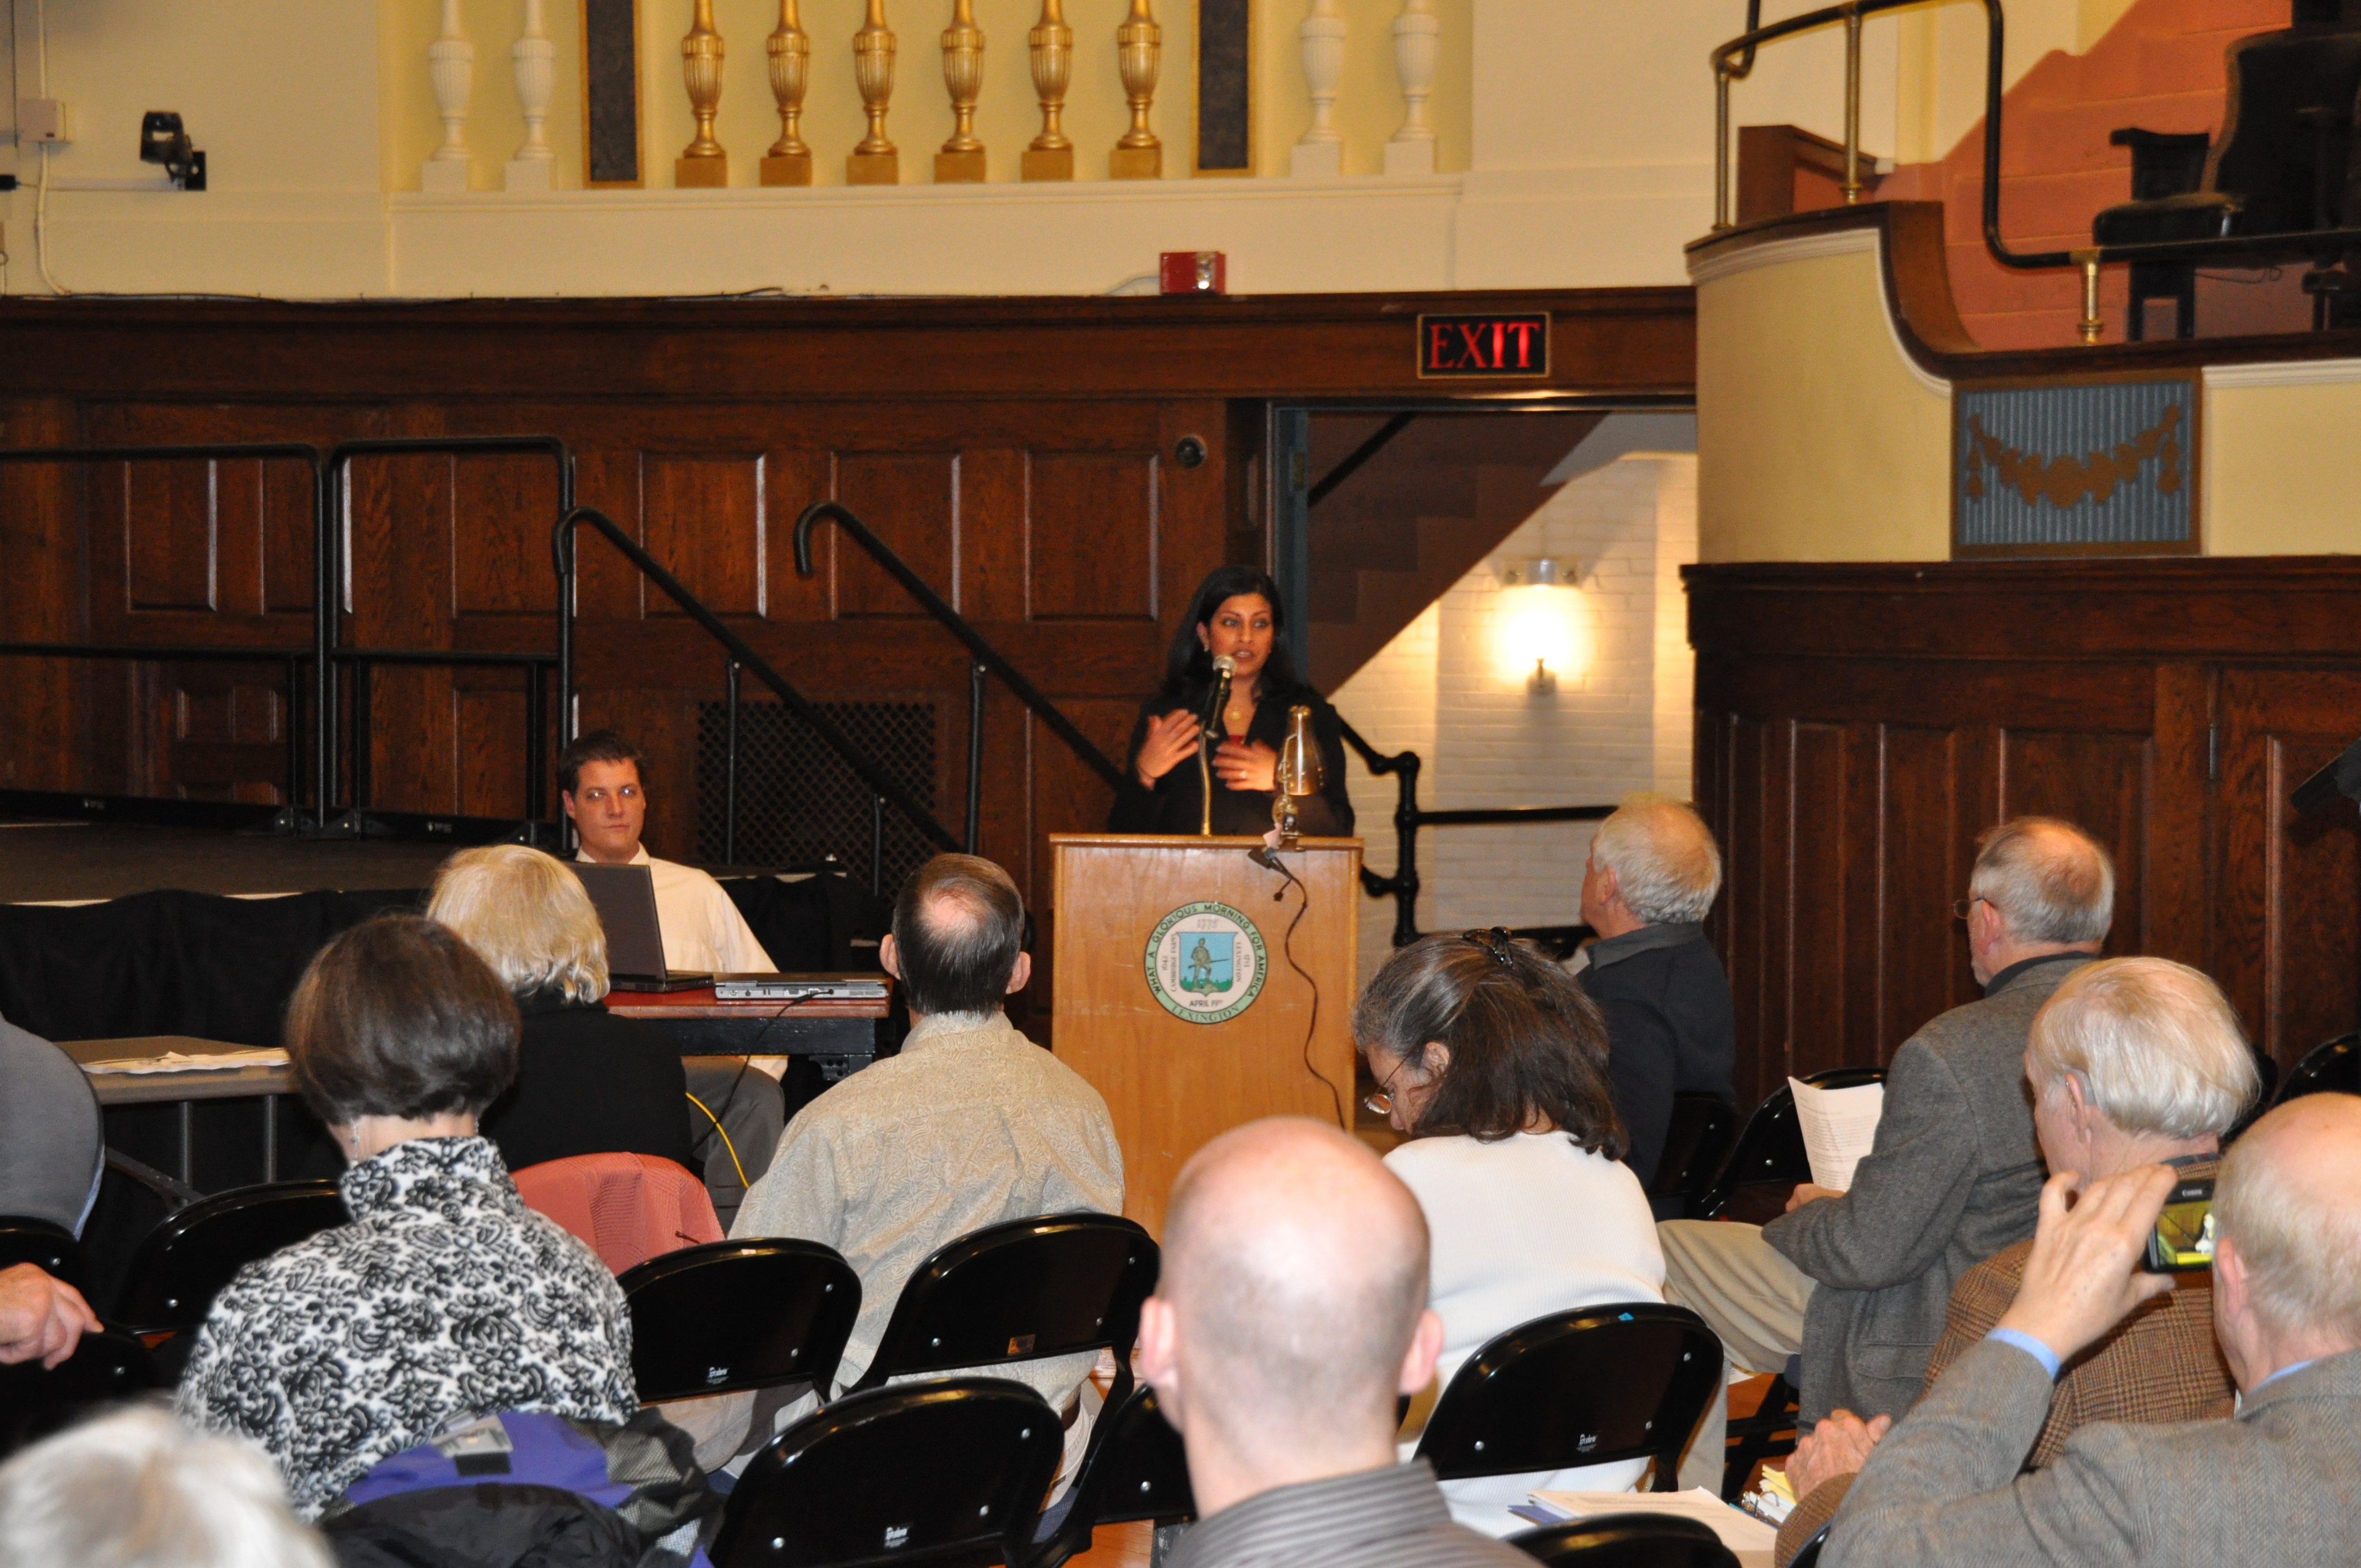 Manisha presenting at Cary Memorial Hall in Lexington in 2010.